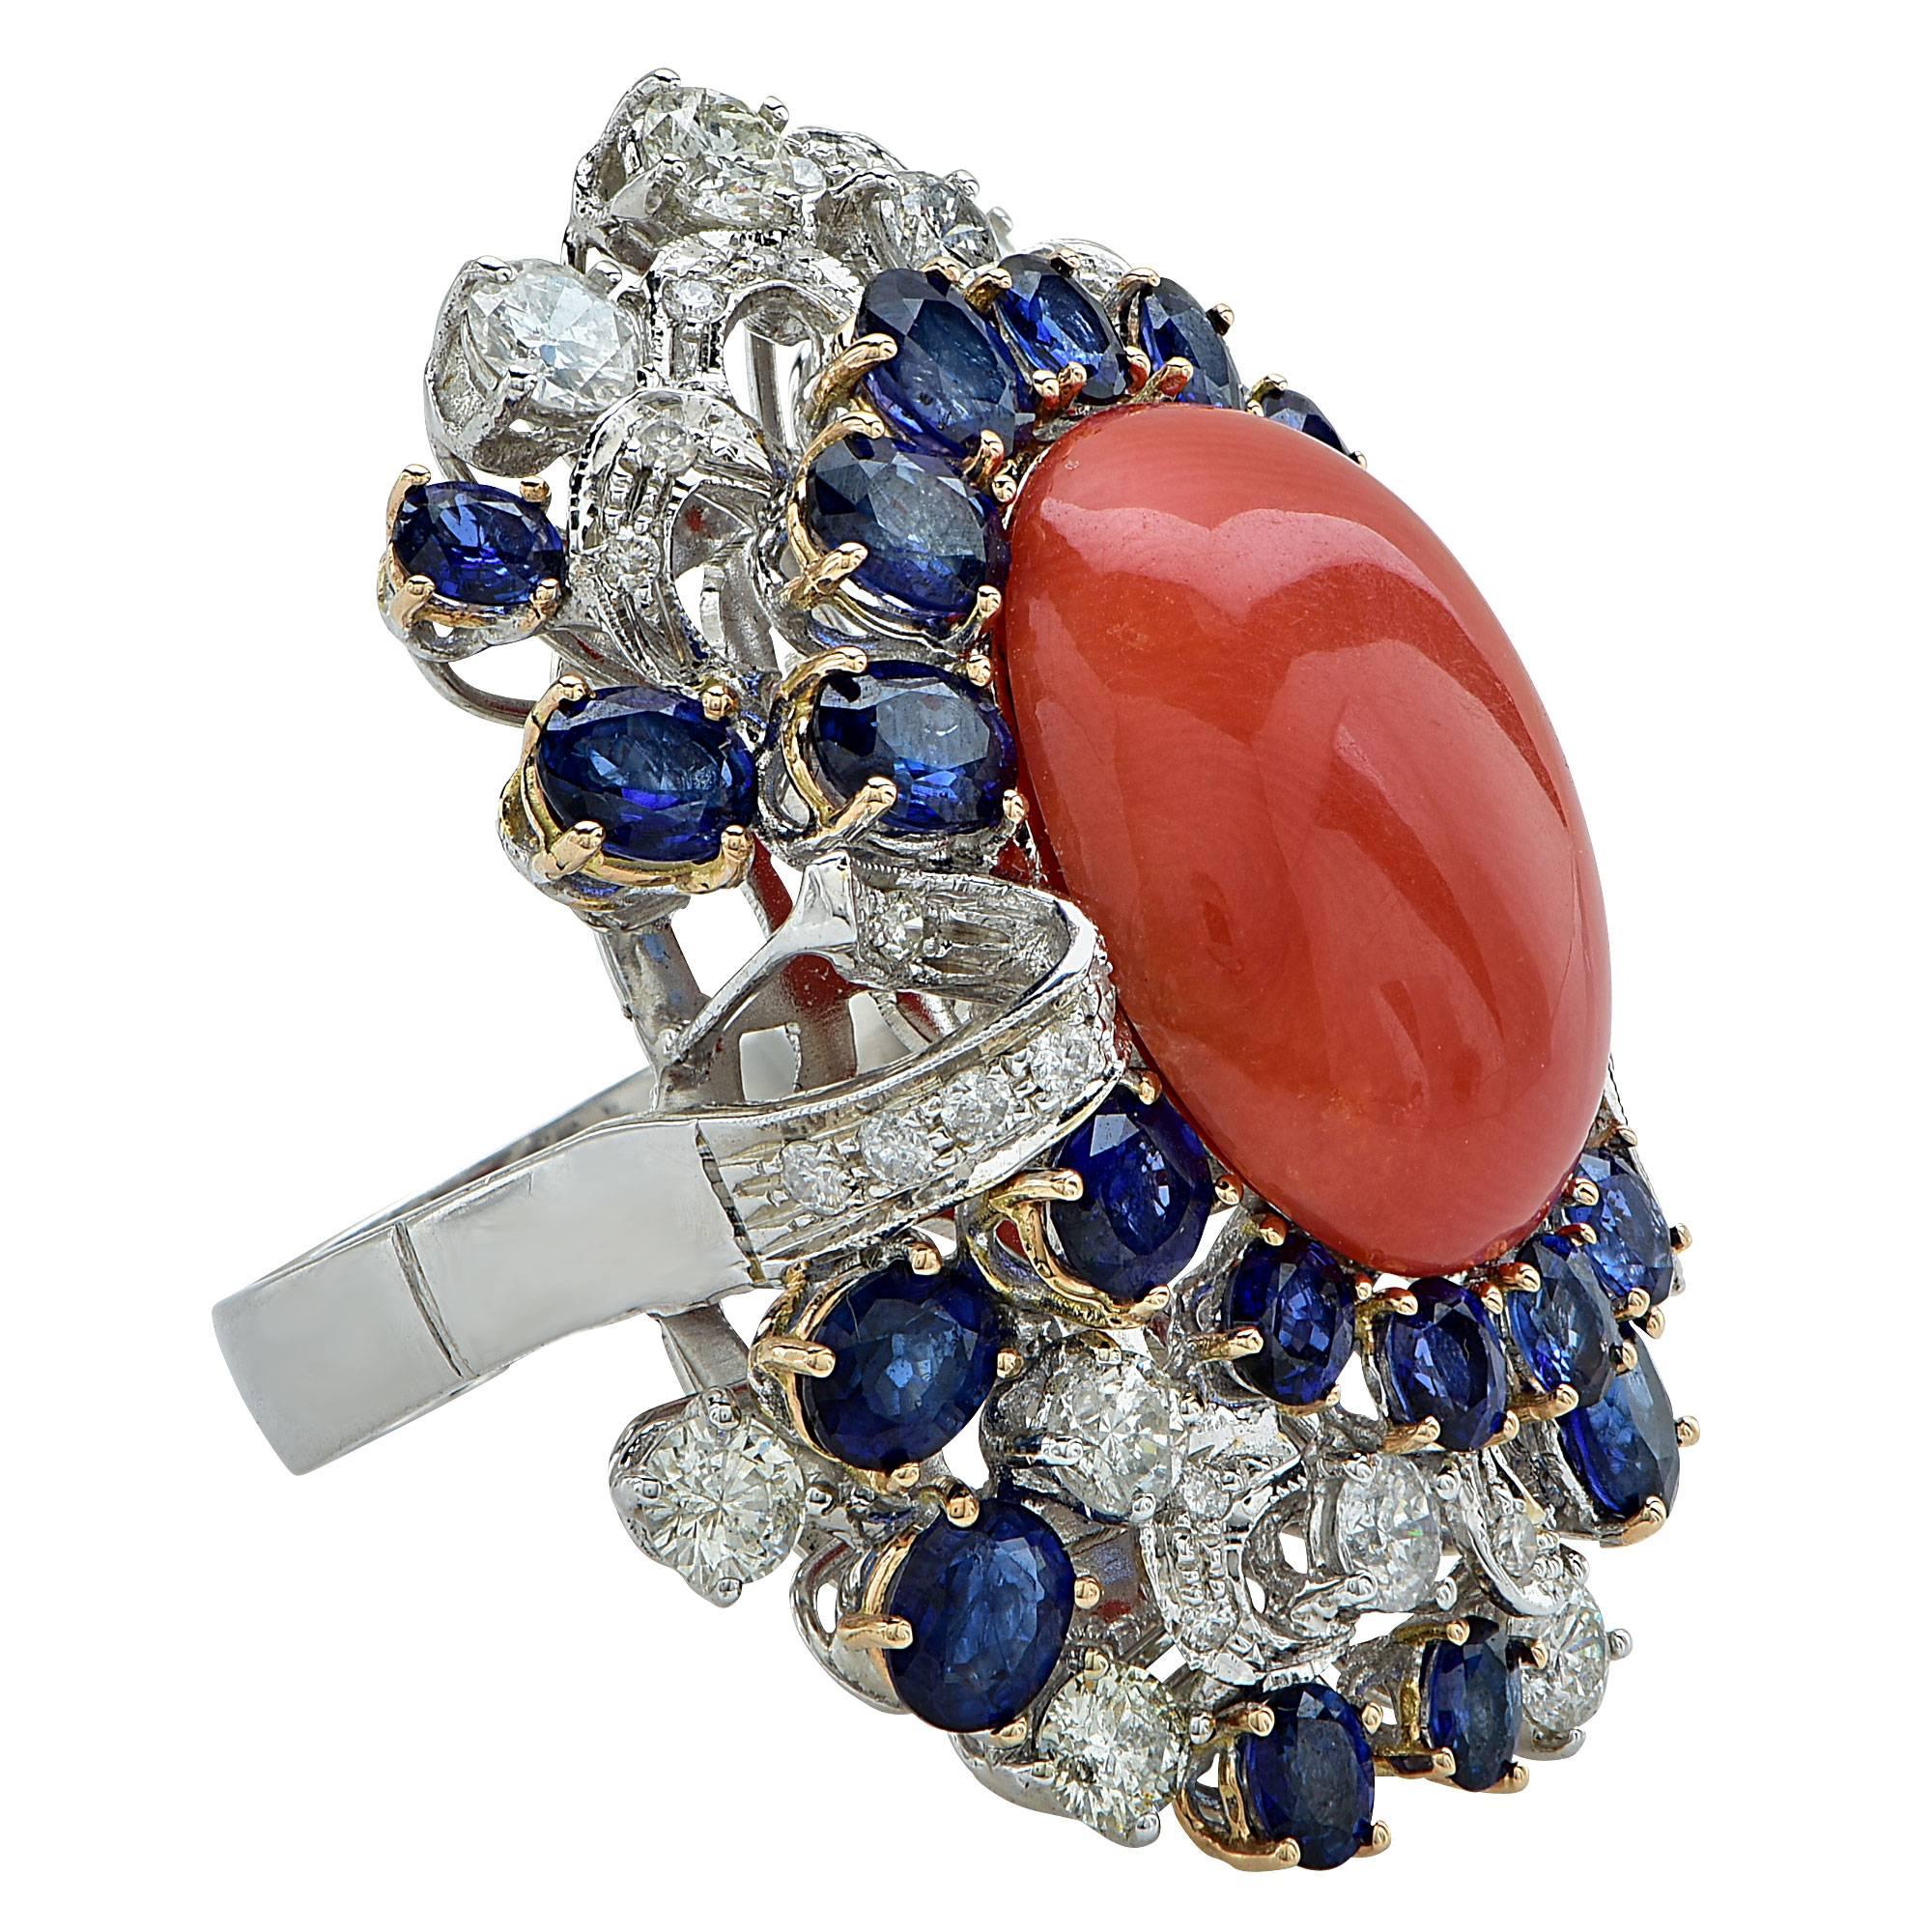 14k white gold ring featuring a coral cabochon accented by approximately 5.00cts of sapphires and 2.20cts of round brilliant cut diamonds, G-I color, VS-SI clarity.

Ring size: 6 (can be sized up or down free of charge)
Metal weight: 22.08